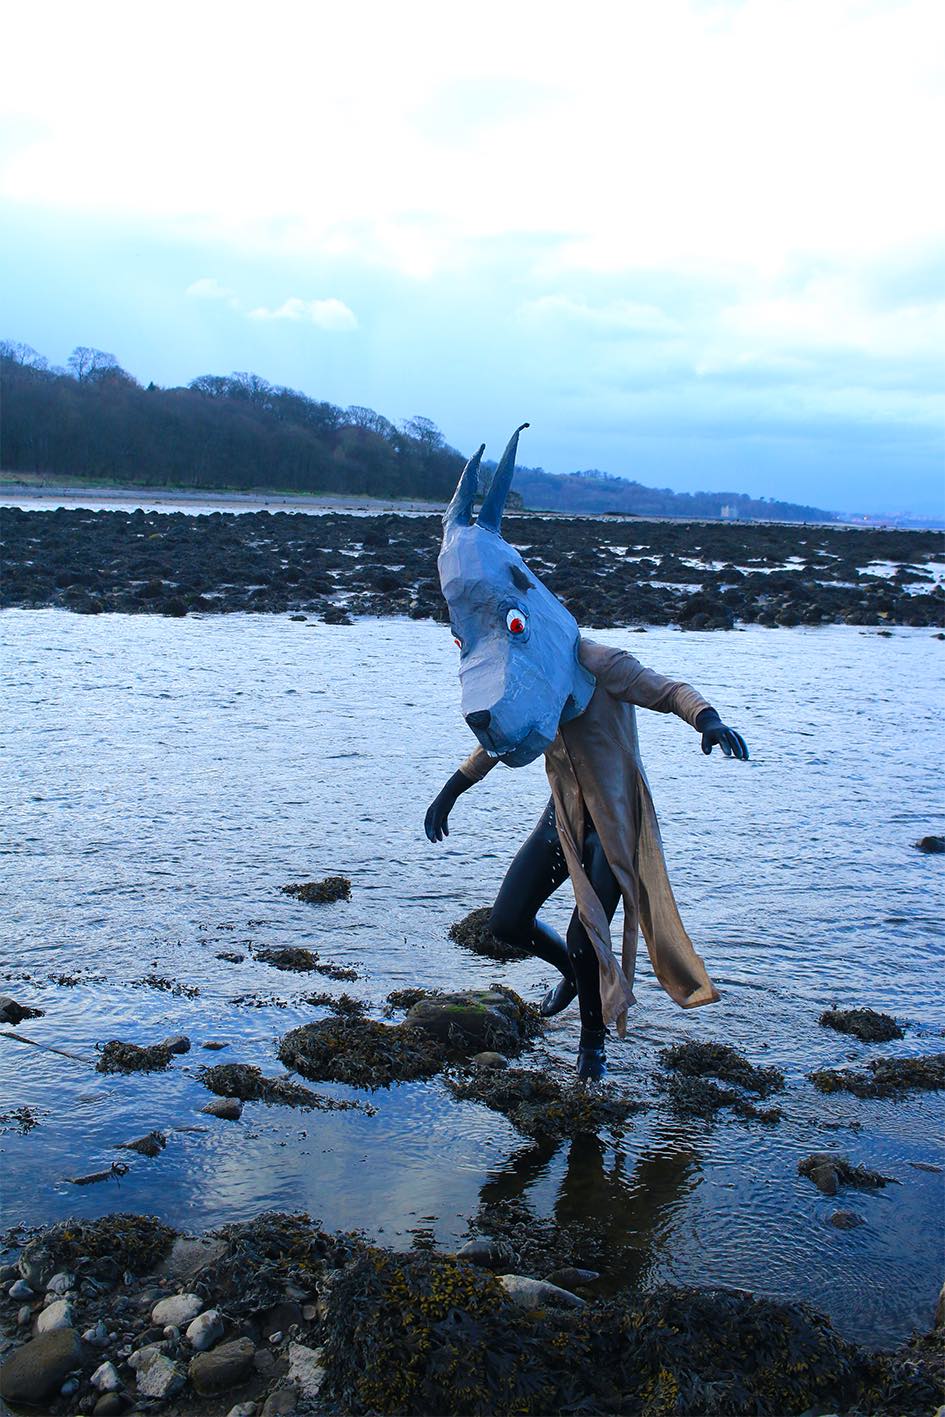 A figure wearing a papier-mache goats mask emerging from the water at the beach.